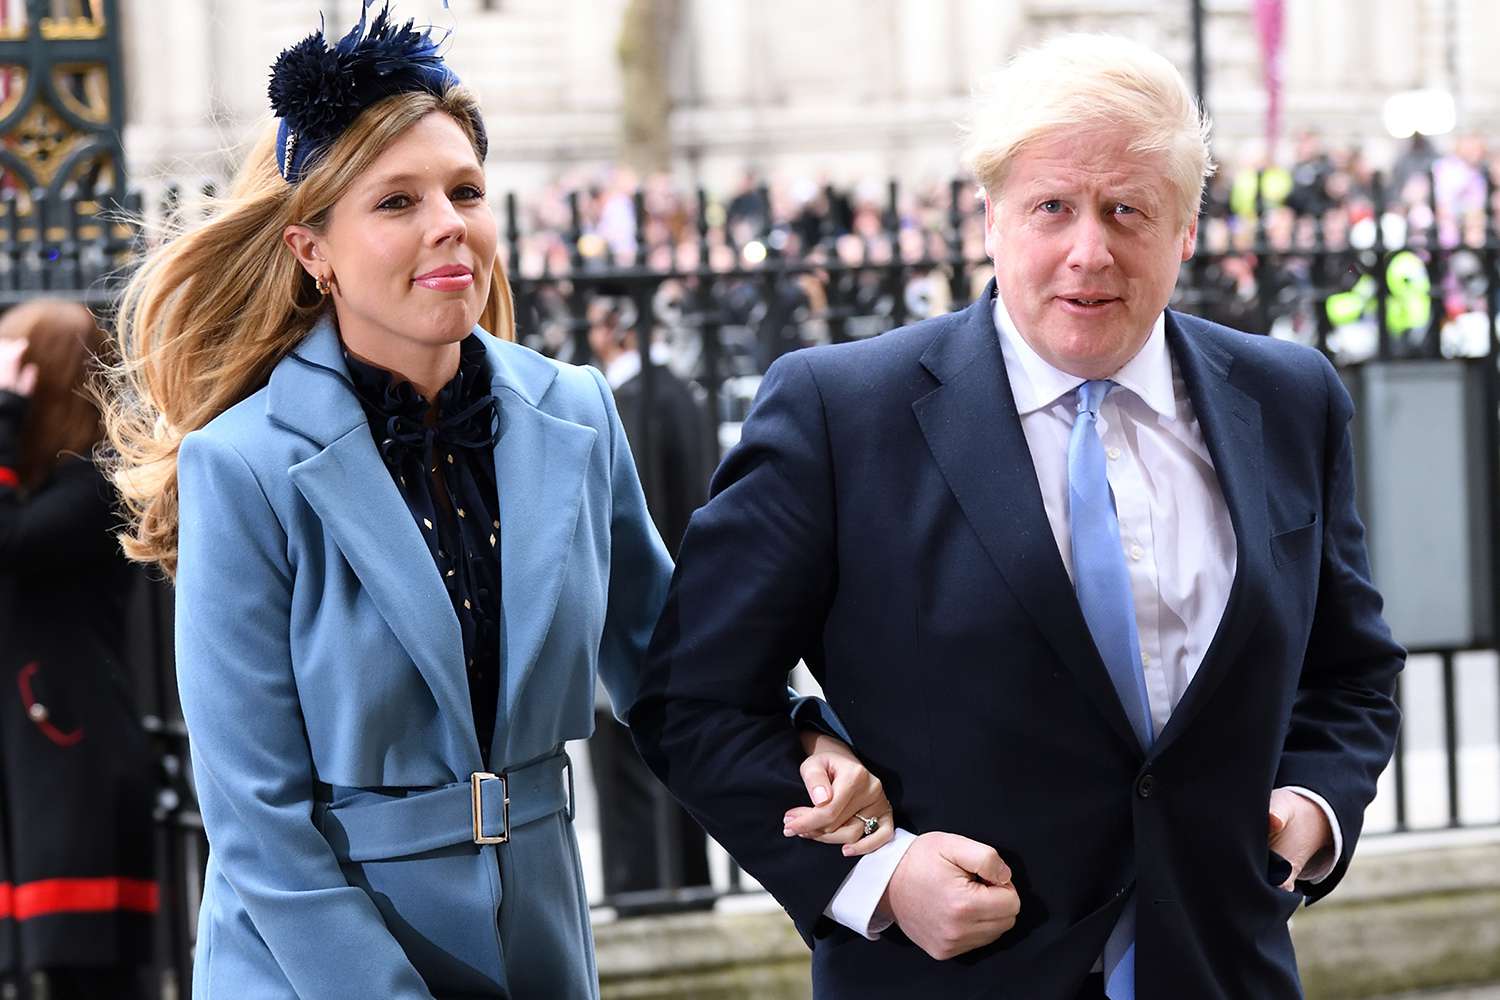 Boris Johnson and Wife Welcome Daughter as He Takes Heat for Party |  PEOPLE.com